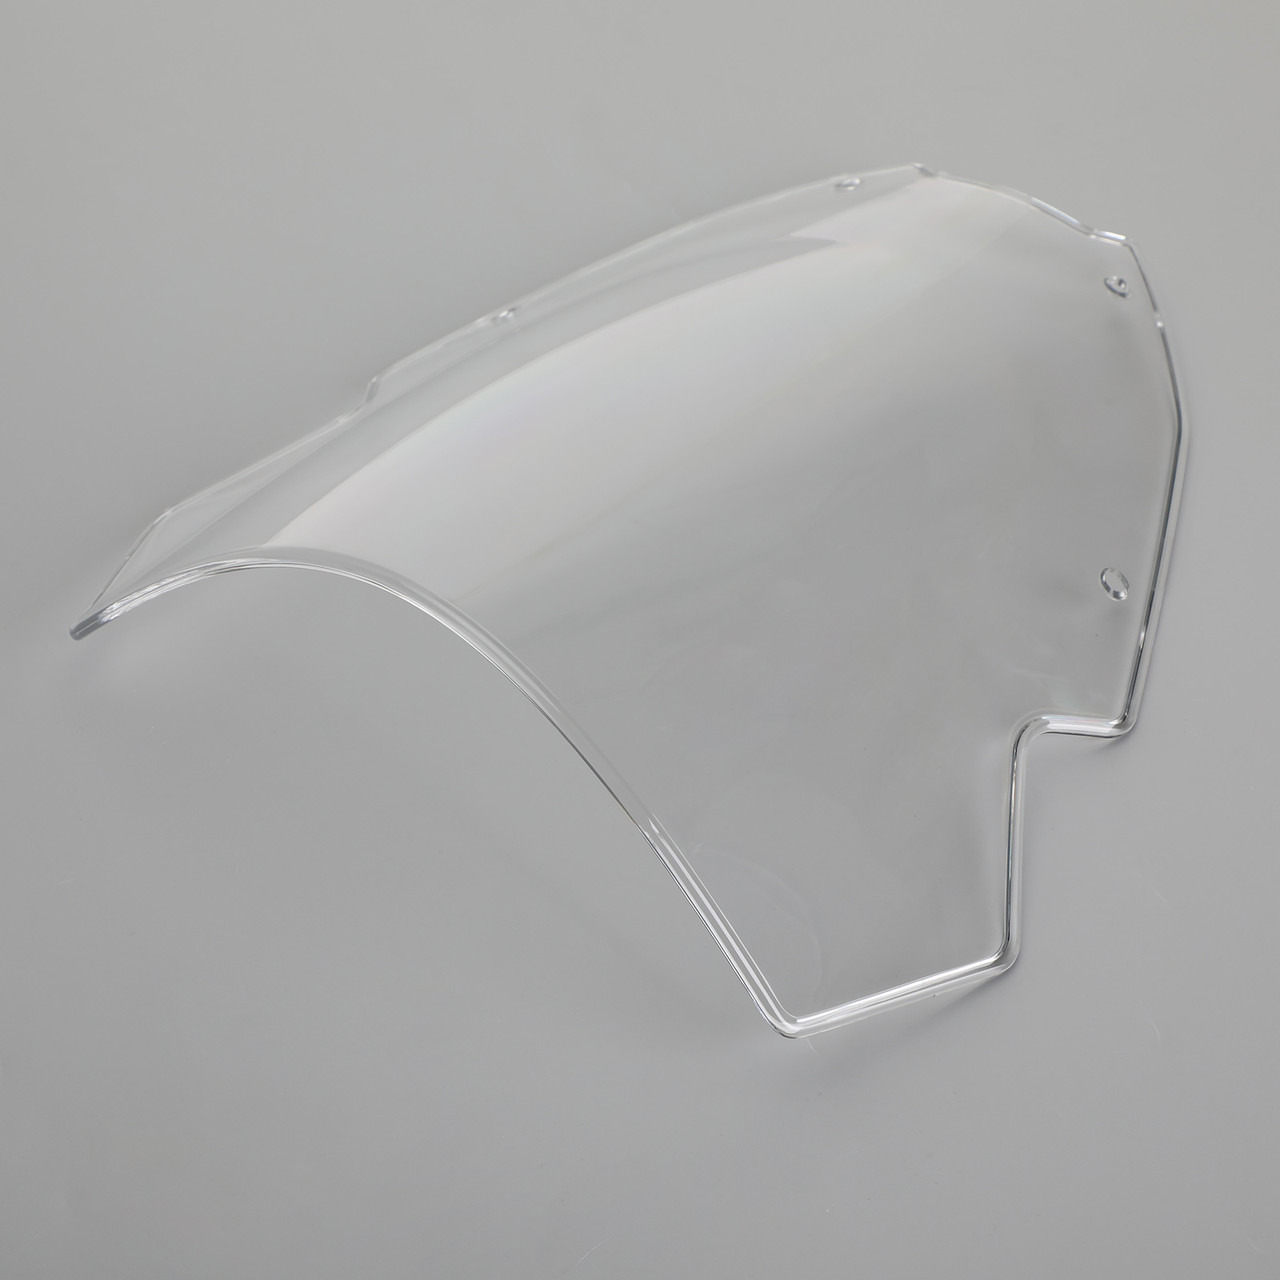 Windscreen Windshield Shield Protector Fit for Yamaha MT-09 2021 Clear